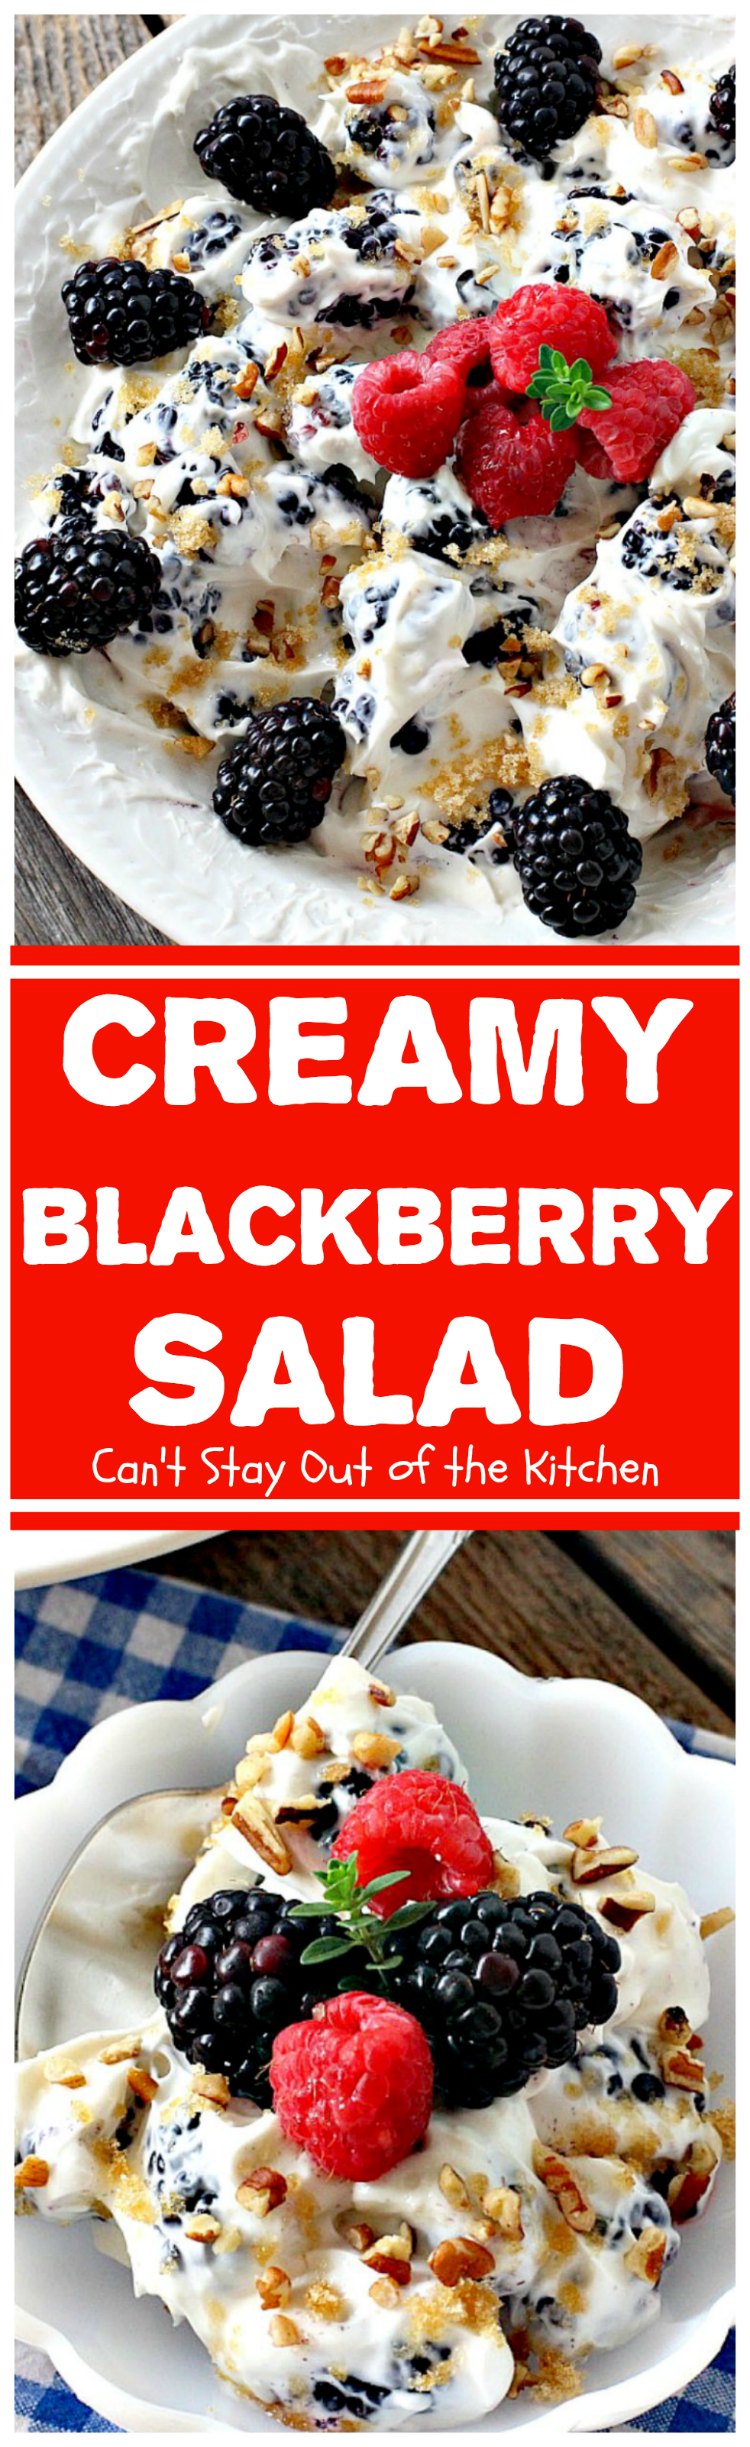 Creamy Blackberry Salad | Can't Stay Out of the KitchenCreamy Blackberry Salad | Can't Stay Out of the Kitchen